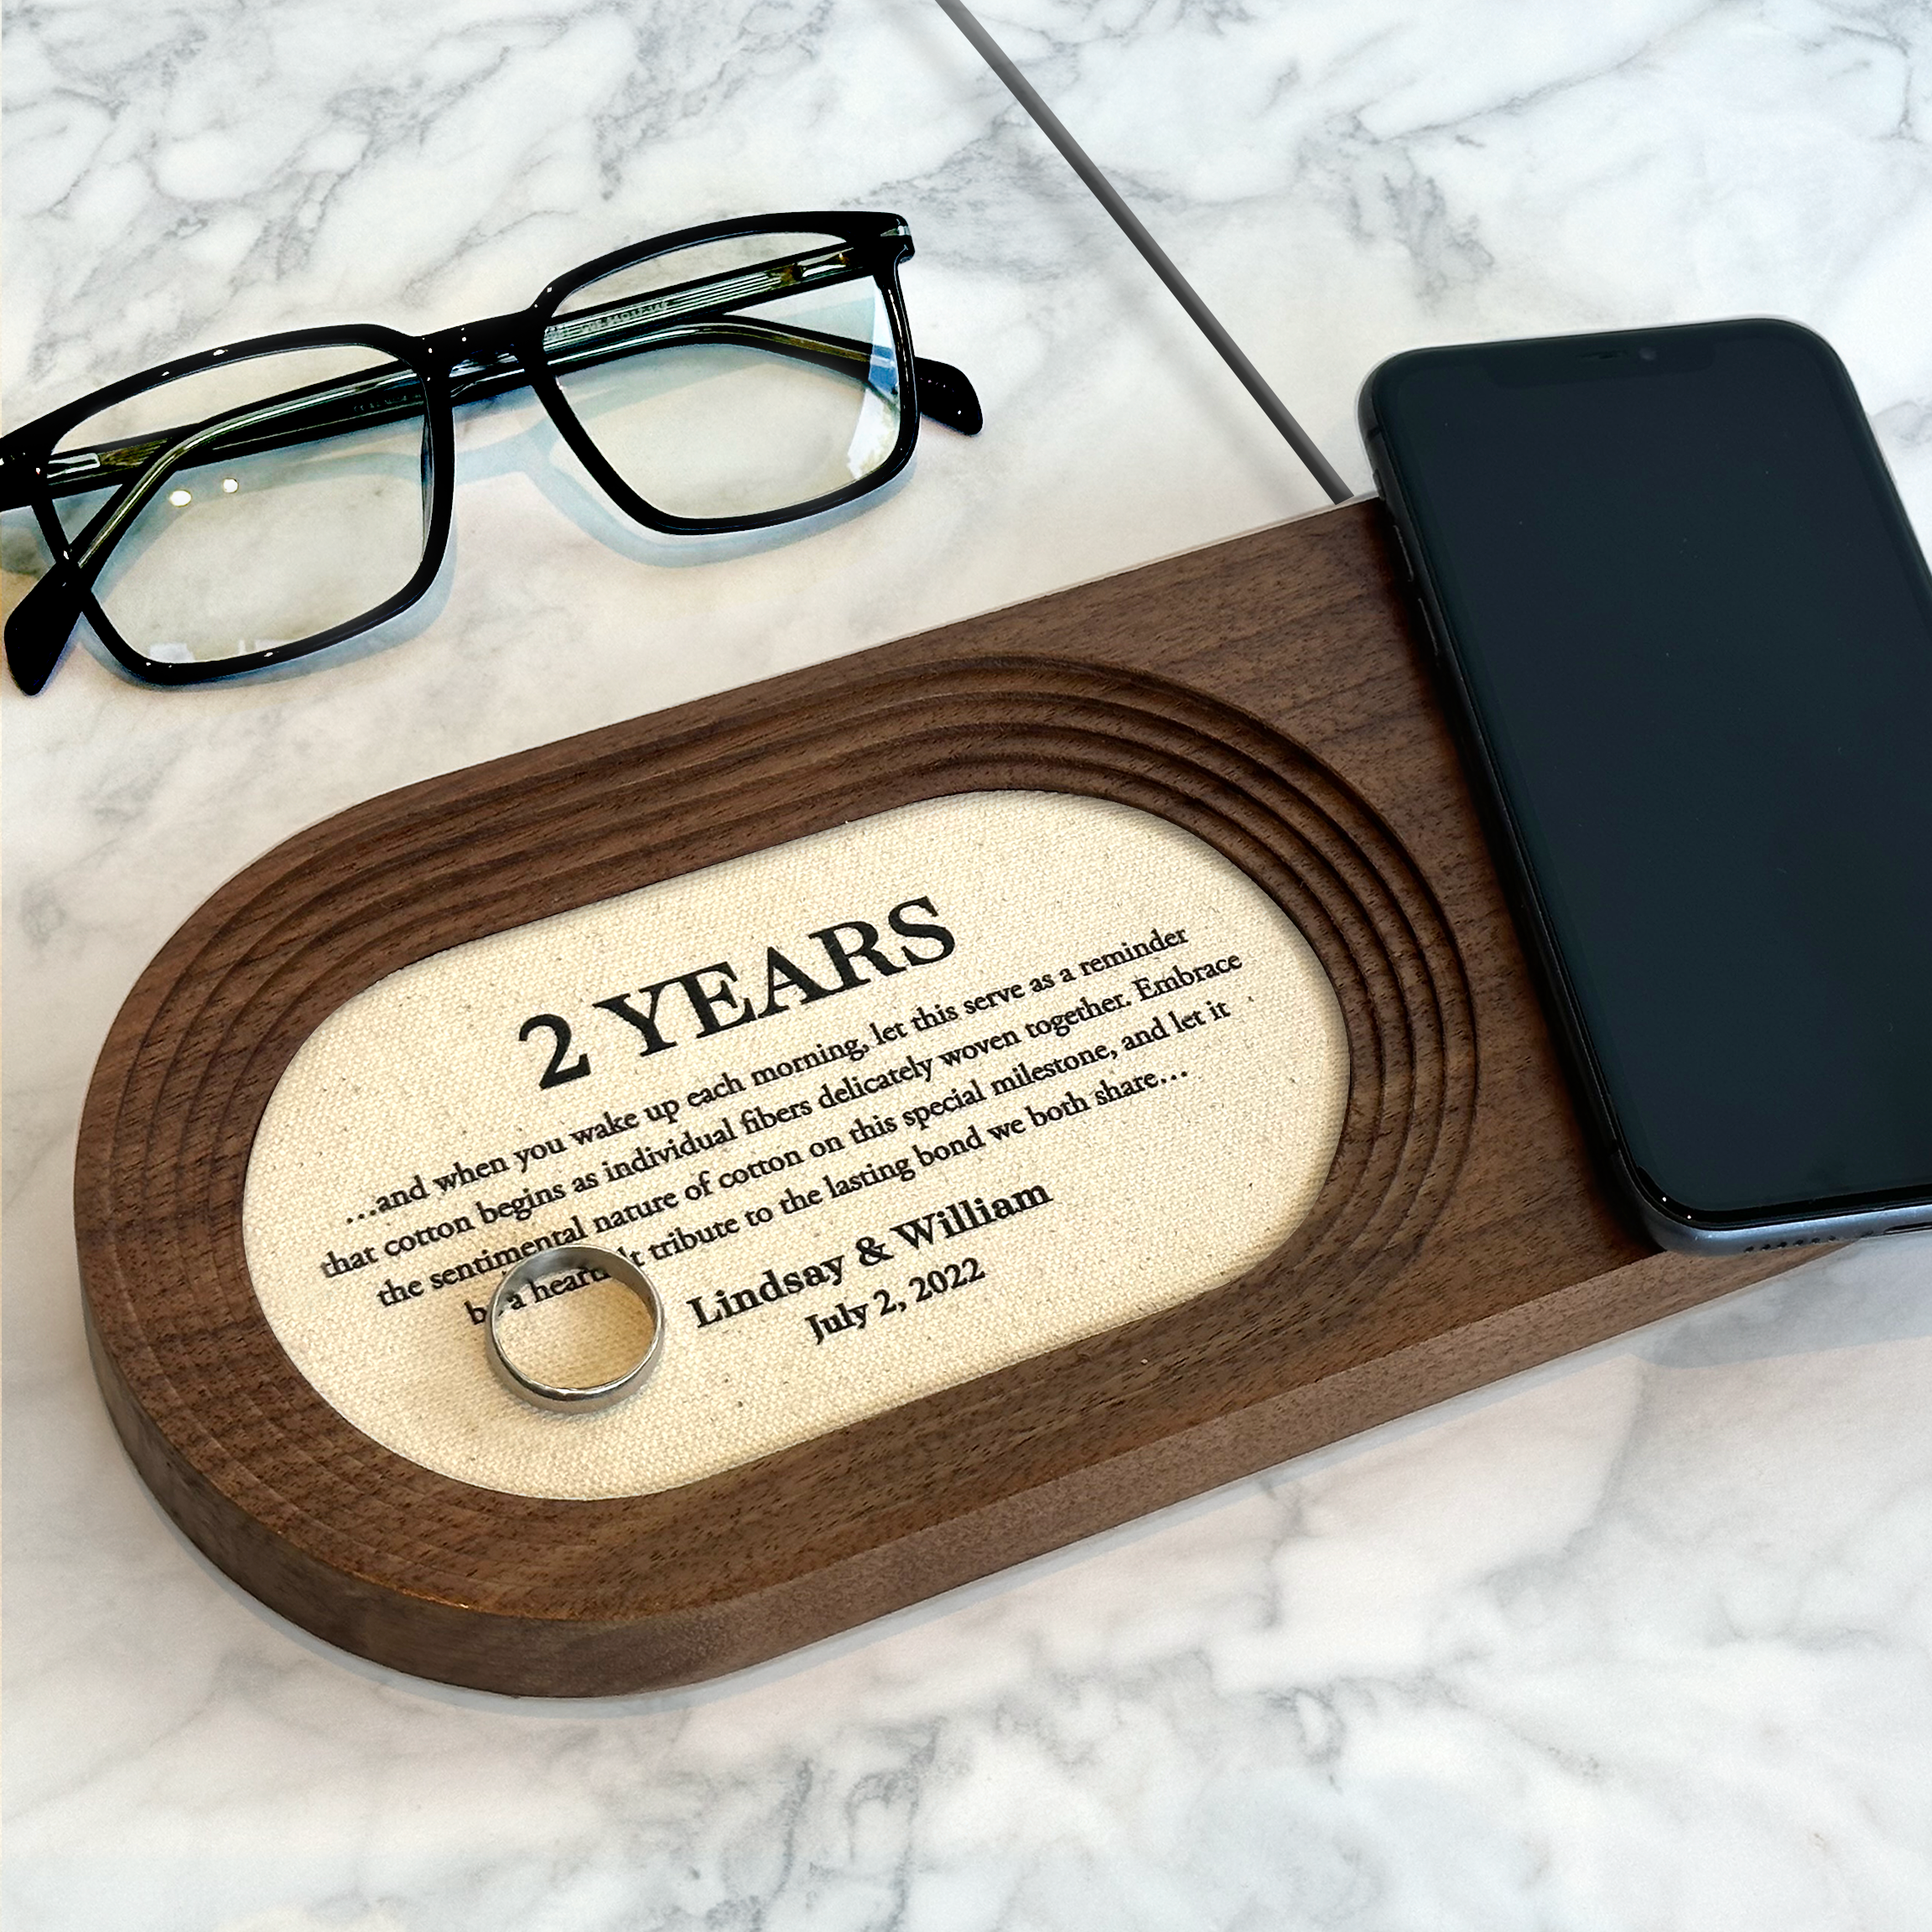 Walnut and cotton tray with wireless phone charging for 2nd Anniversary